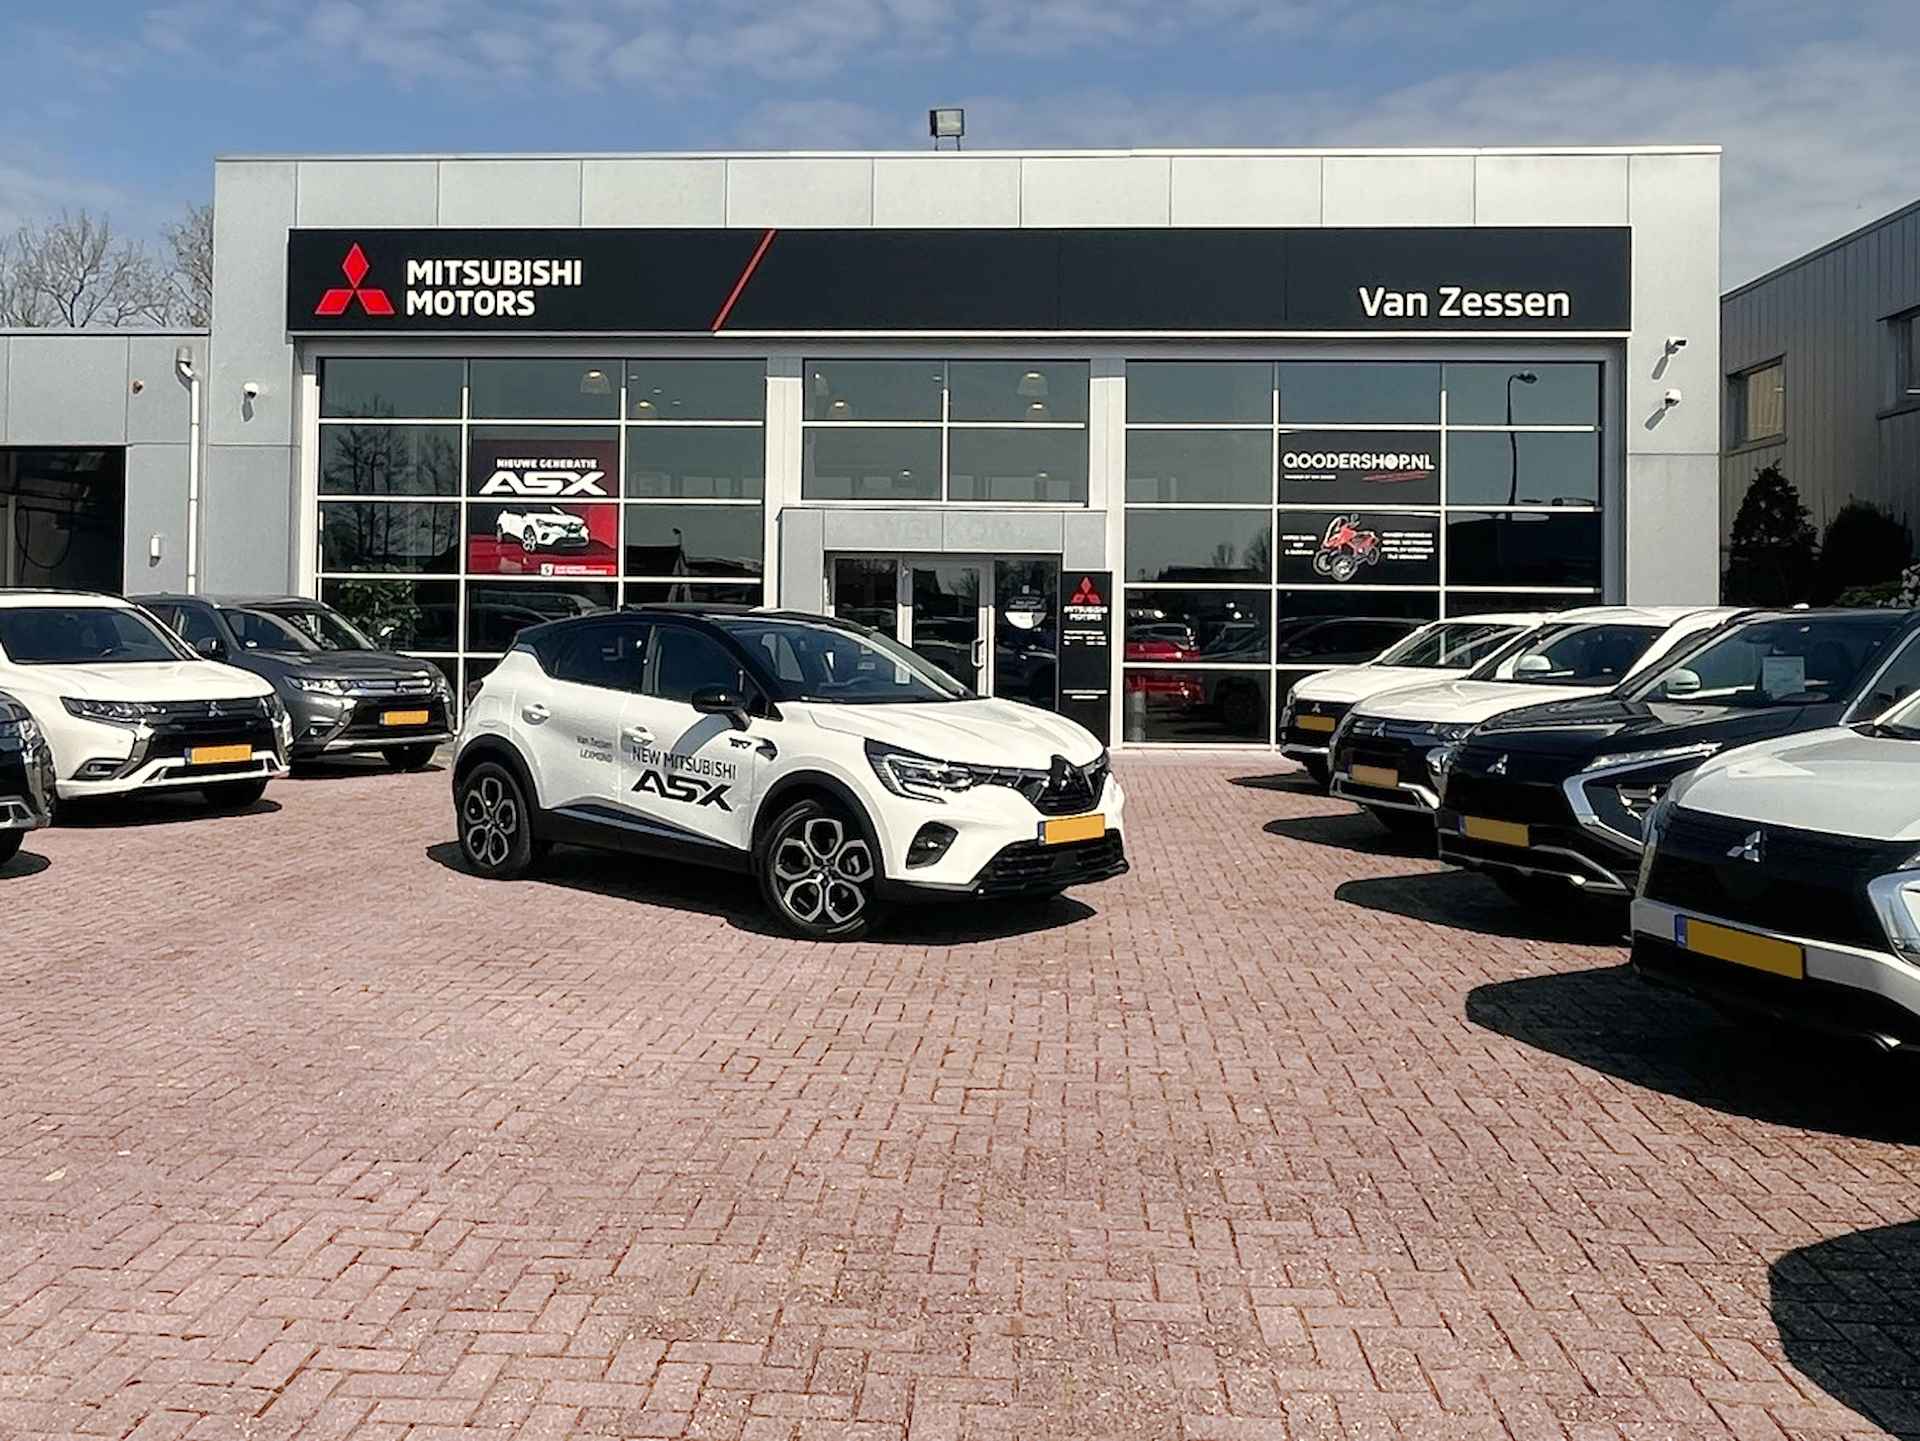 Mitsubishi Space Star 1.2 Dynamic | Achteruitrijcamera | Uit voorraad leverbaar | Apple Carplay / Androi Auto | Private lease € 349 per maand | - 26/26